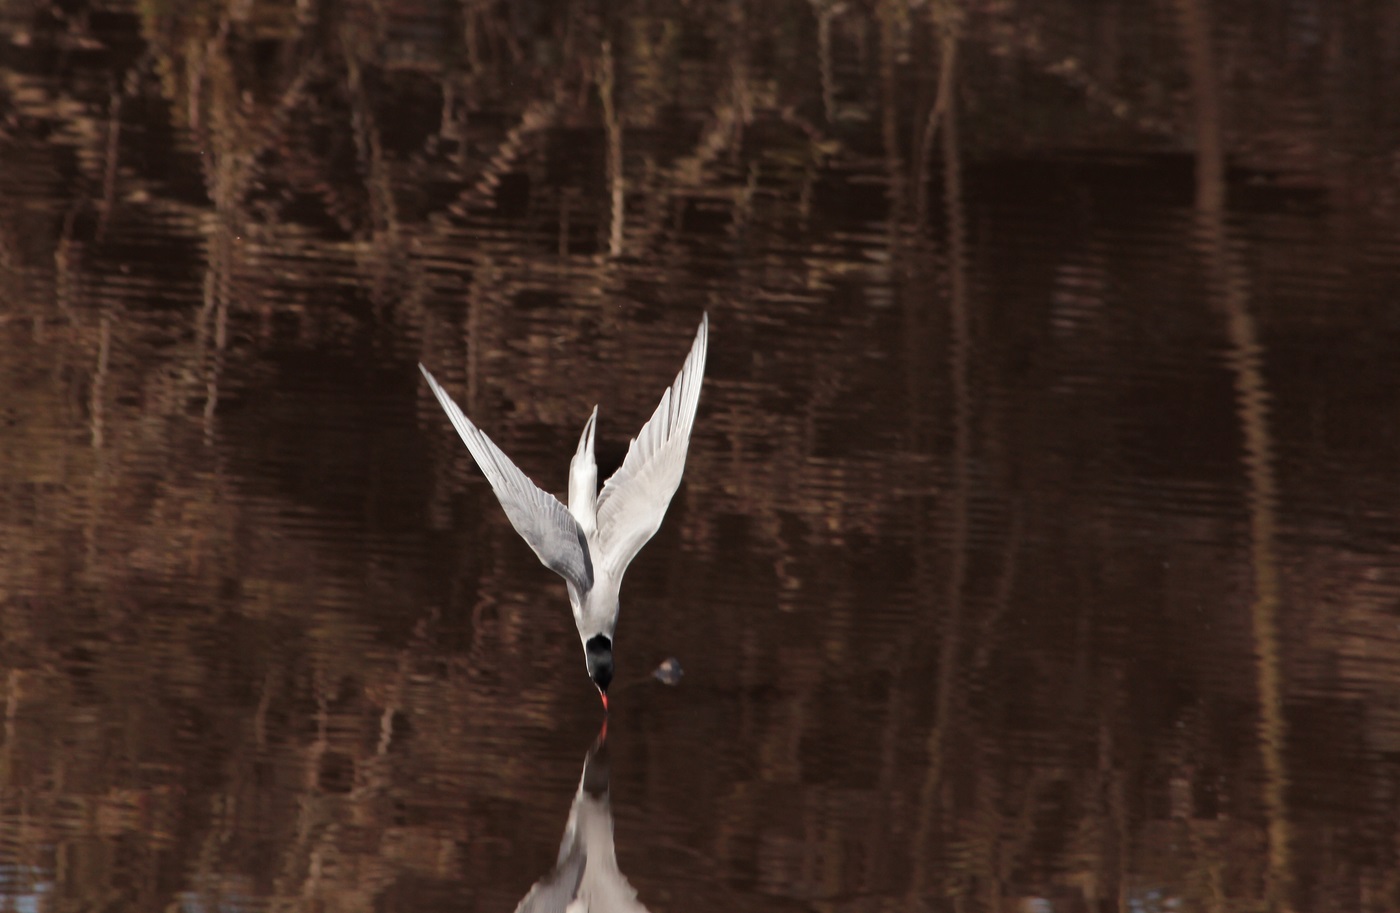 Common tern for a moment before diving